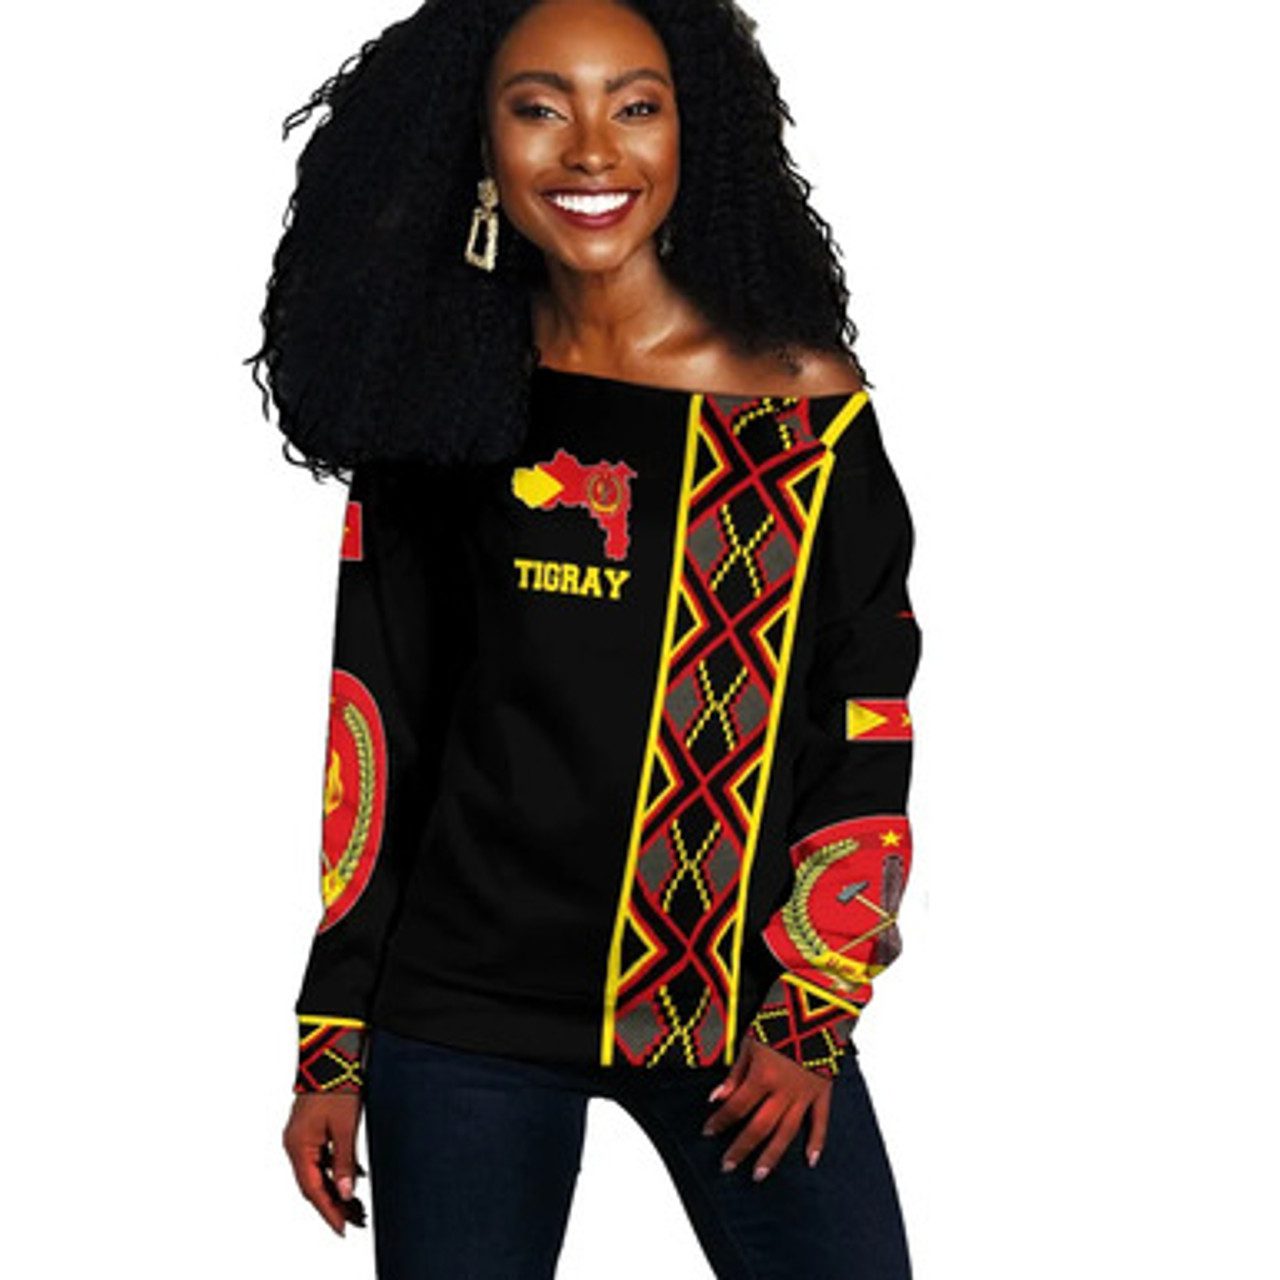 Tigray Off Shoulder Sweater. Tigray Maps Africa Pattern Black